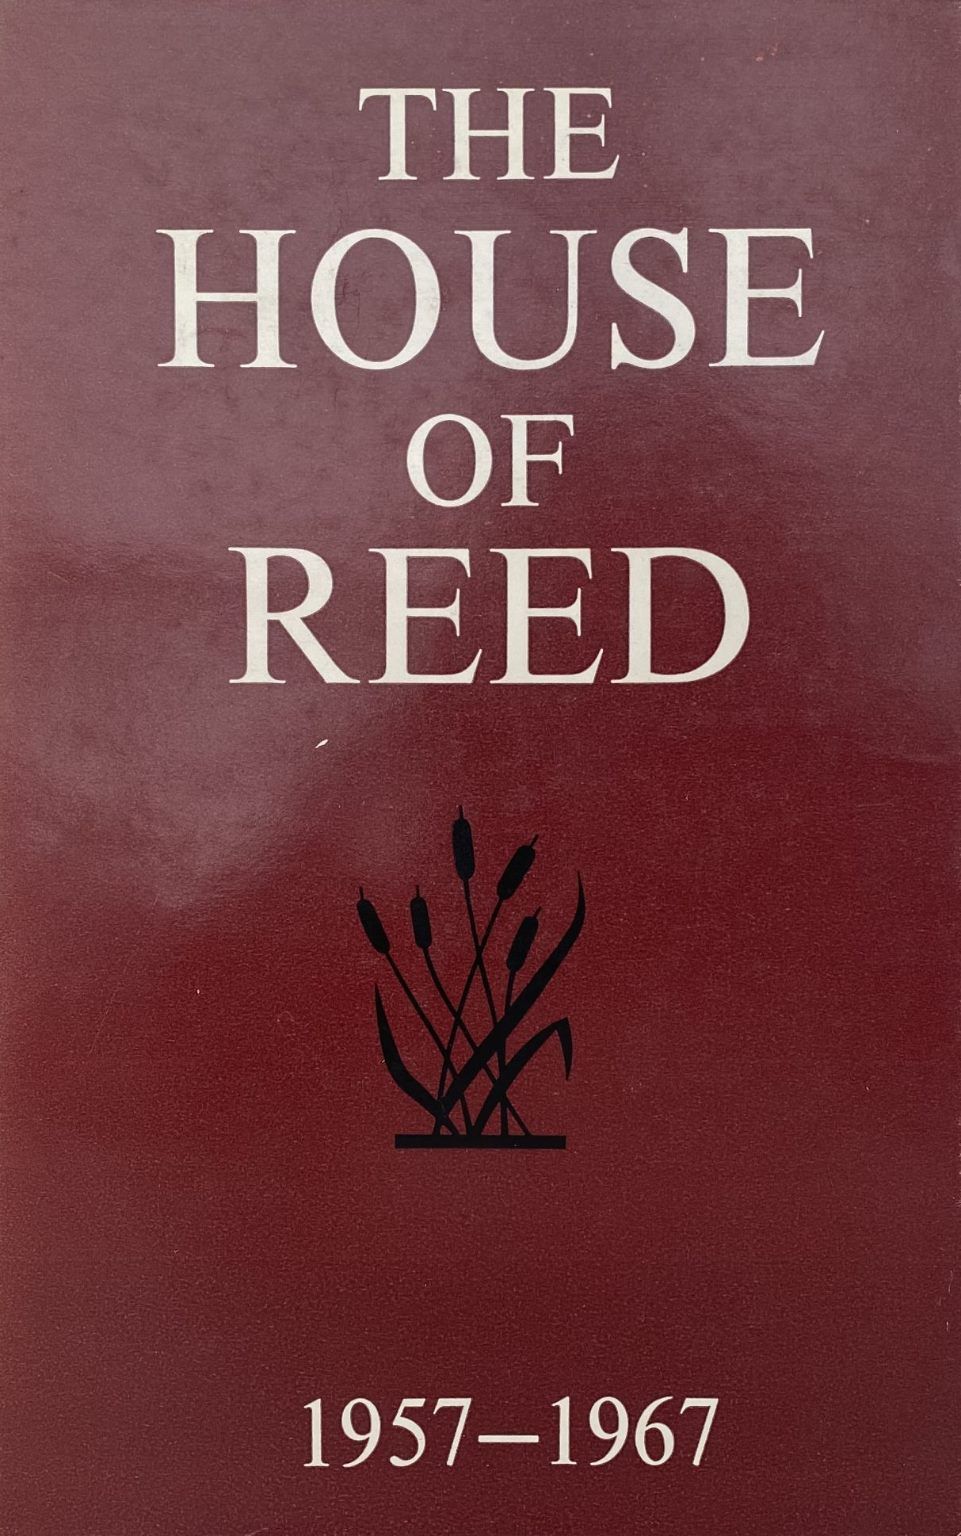 THE HOUSE OF REED: 50 Years of Publishing in New Zealand 1907-1957